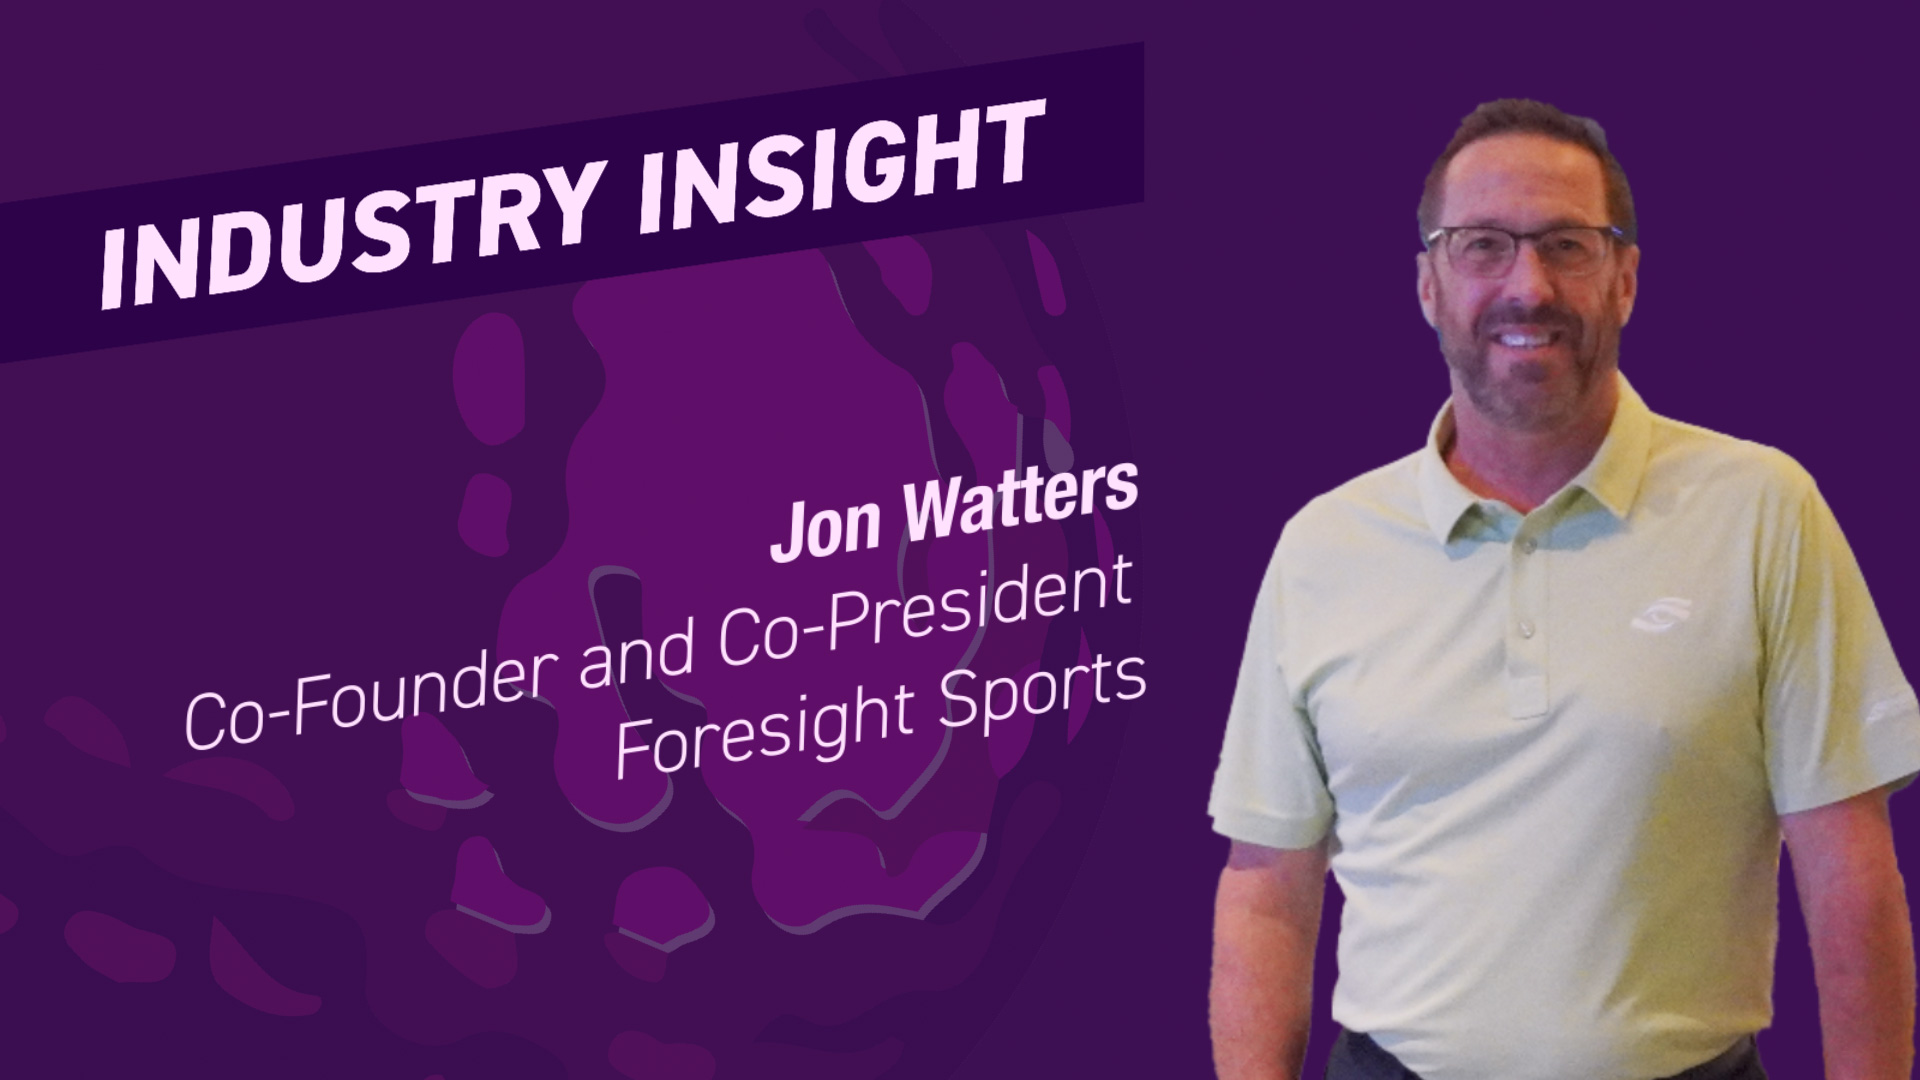 Industry Insight: Jon Watters, Co-Founder and Co-President, Foresight Sports